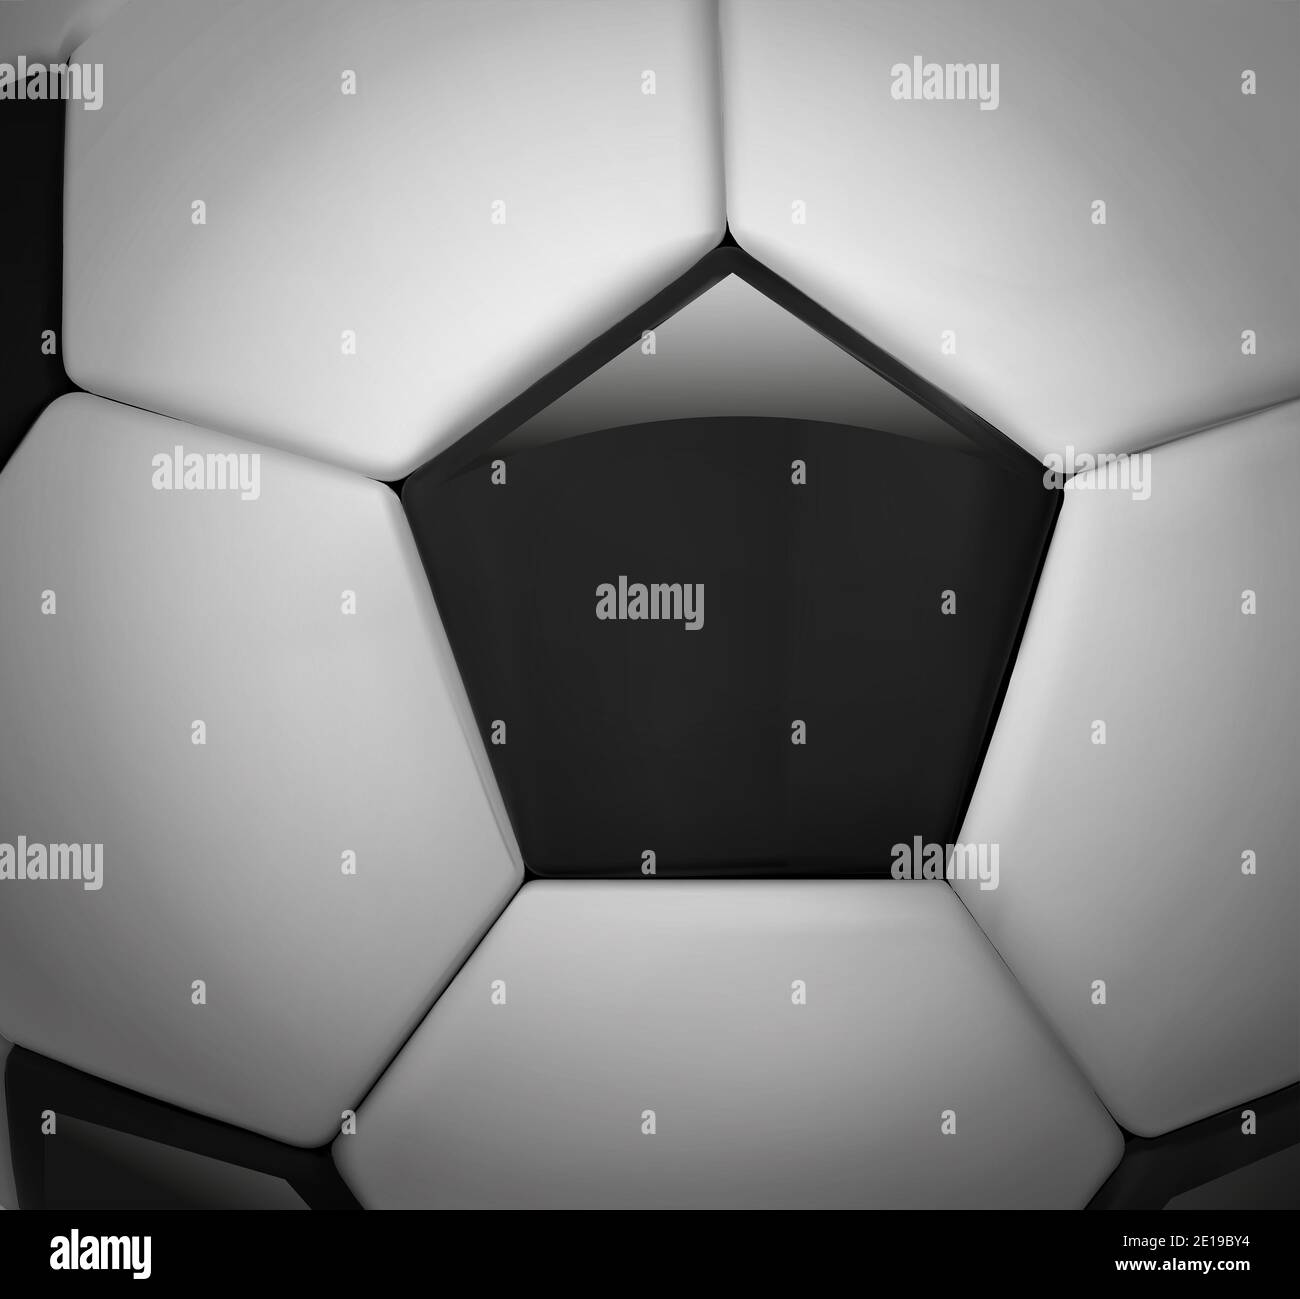 Soccer ball close up with text for football match design. illustration Stock Photo